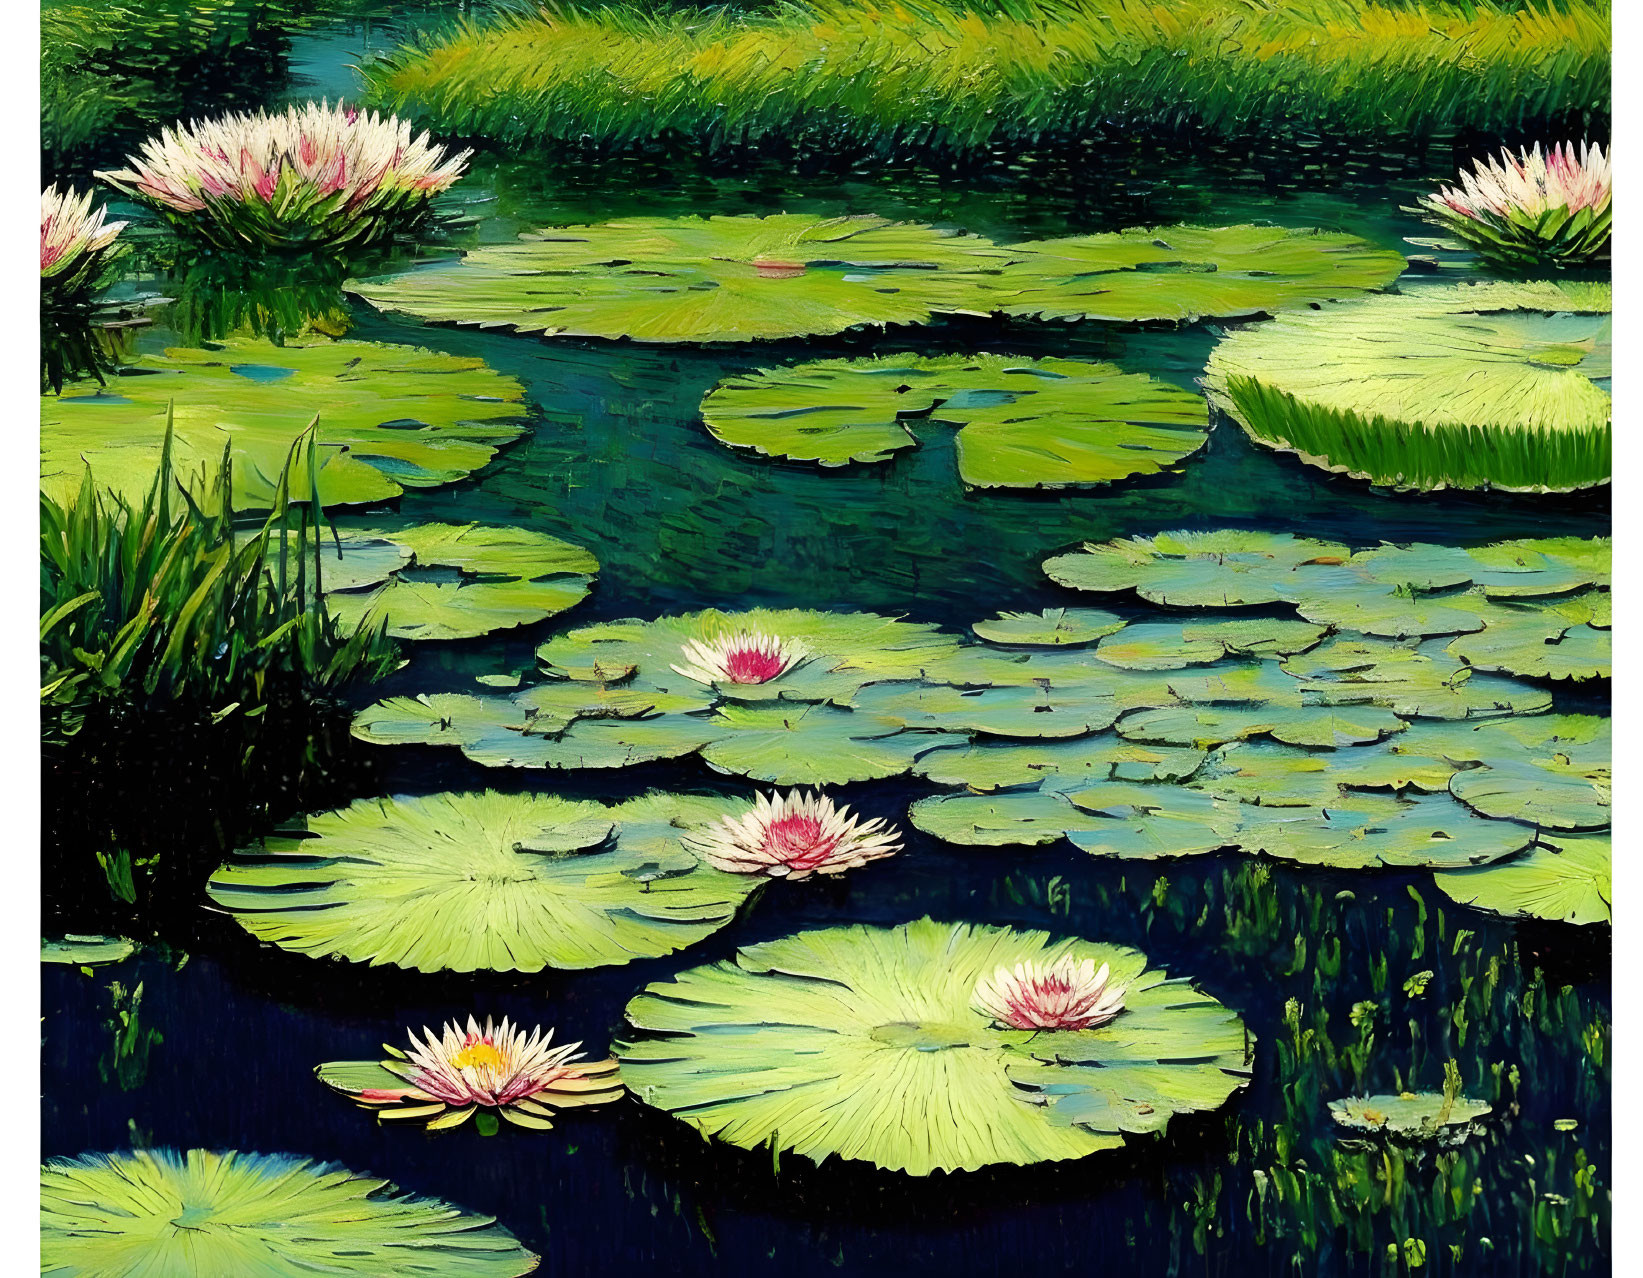 Colorful water lily pond painting with pink flowers and green lily pads